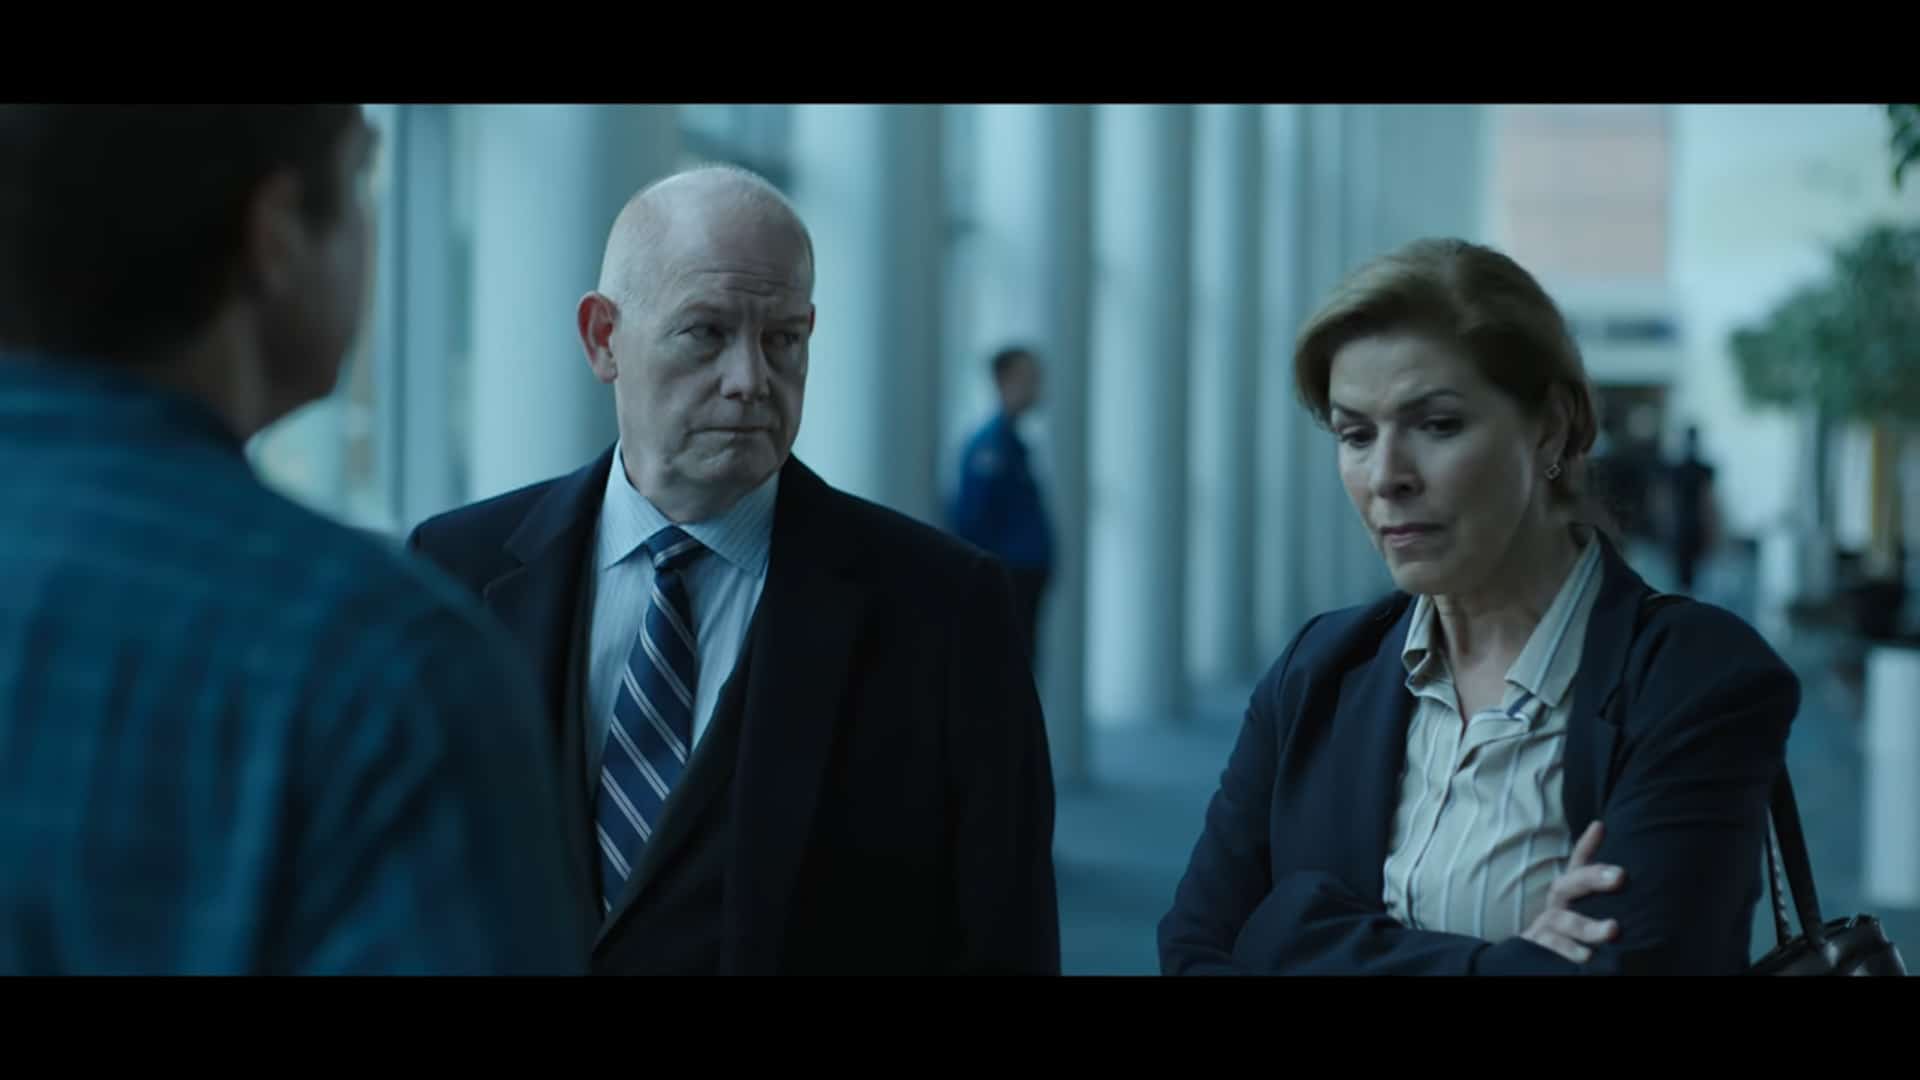 Agent Graves (Glenn Morshower) and Agent Clay (Tess Malis Kincaid) talking with each other and Marty about how to make a deal regarding Omar and Javi